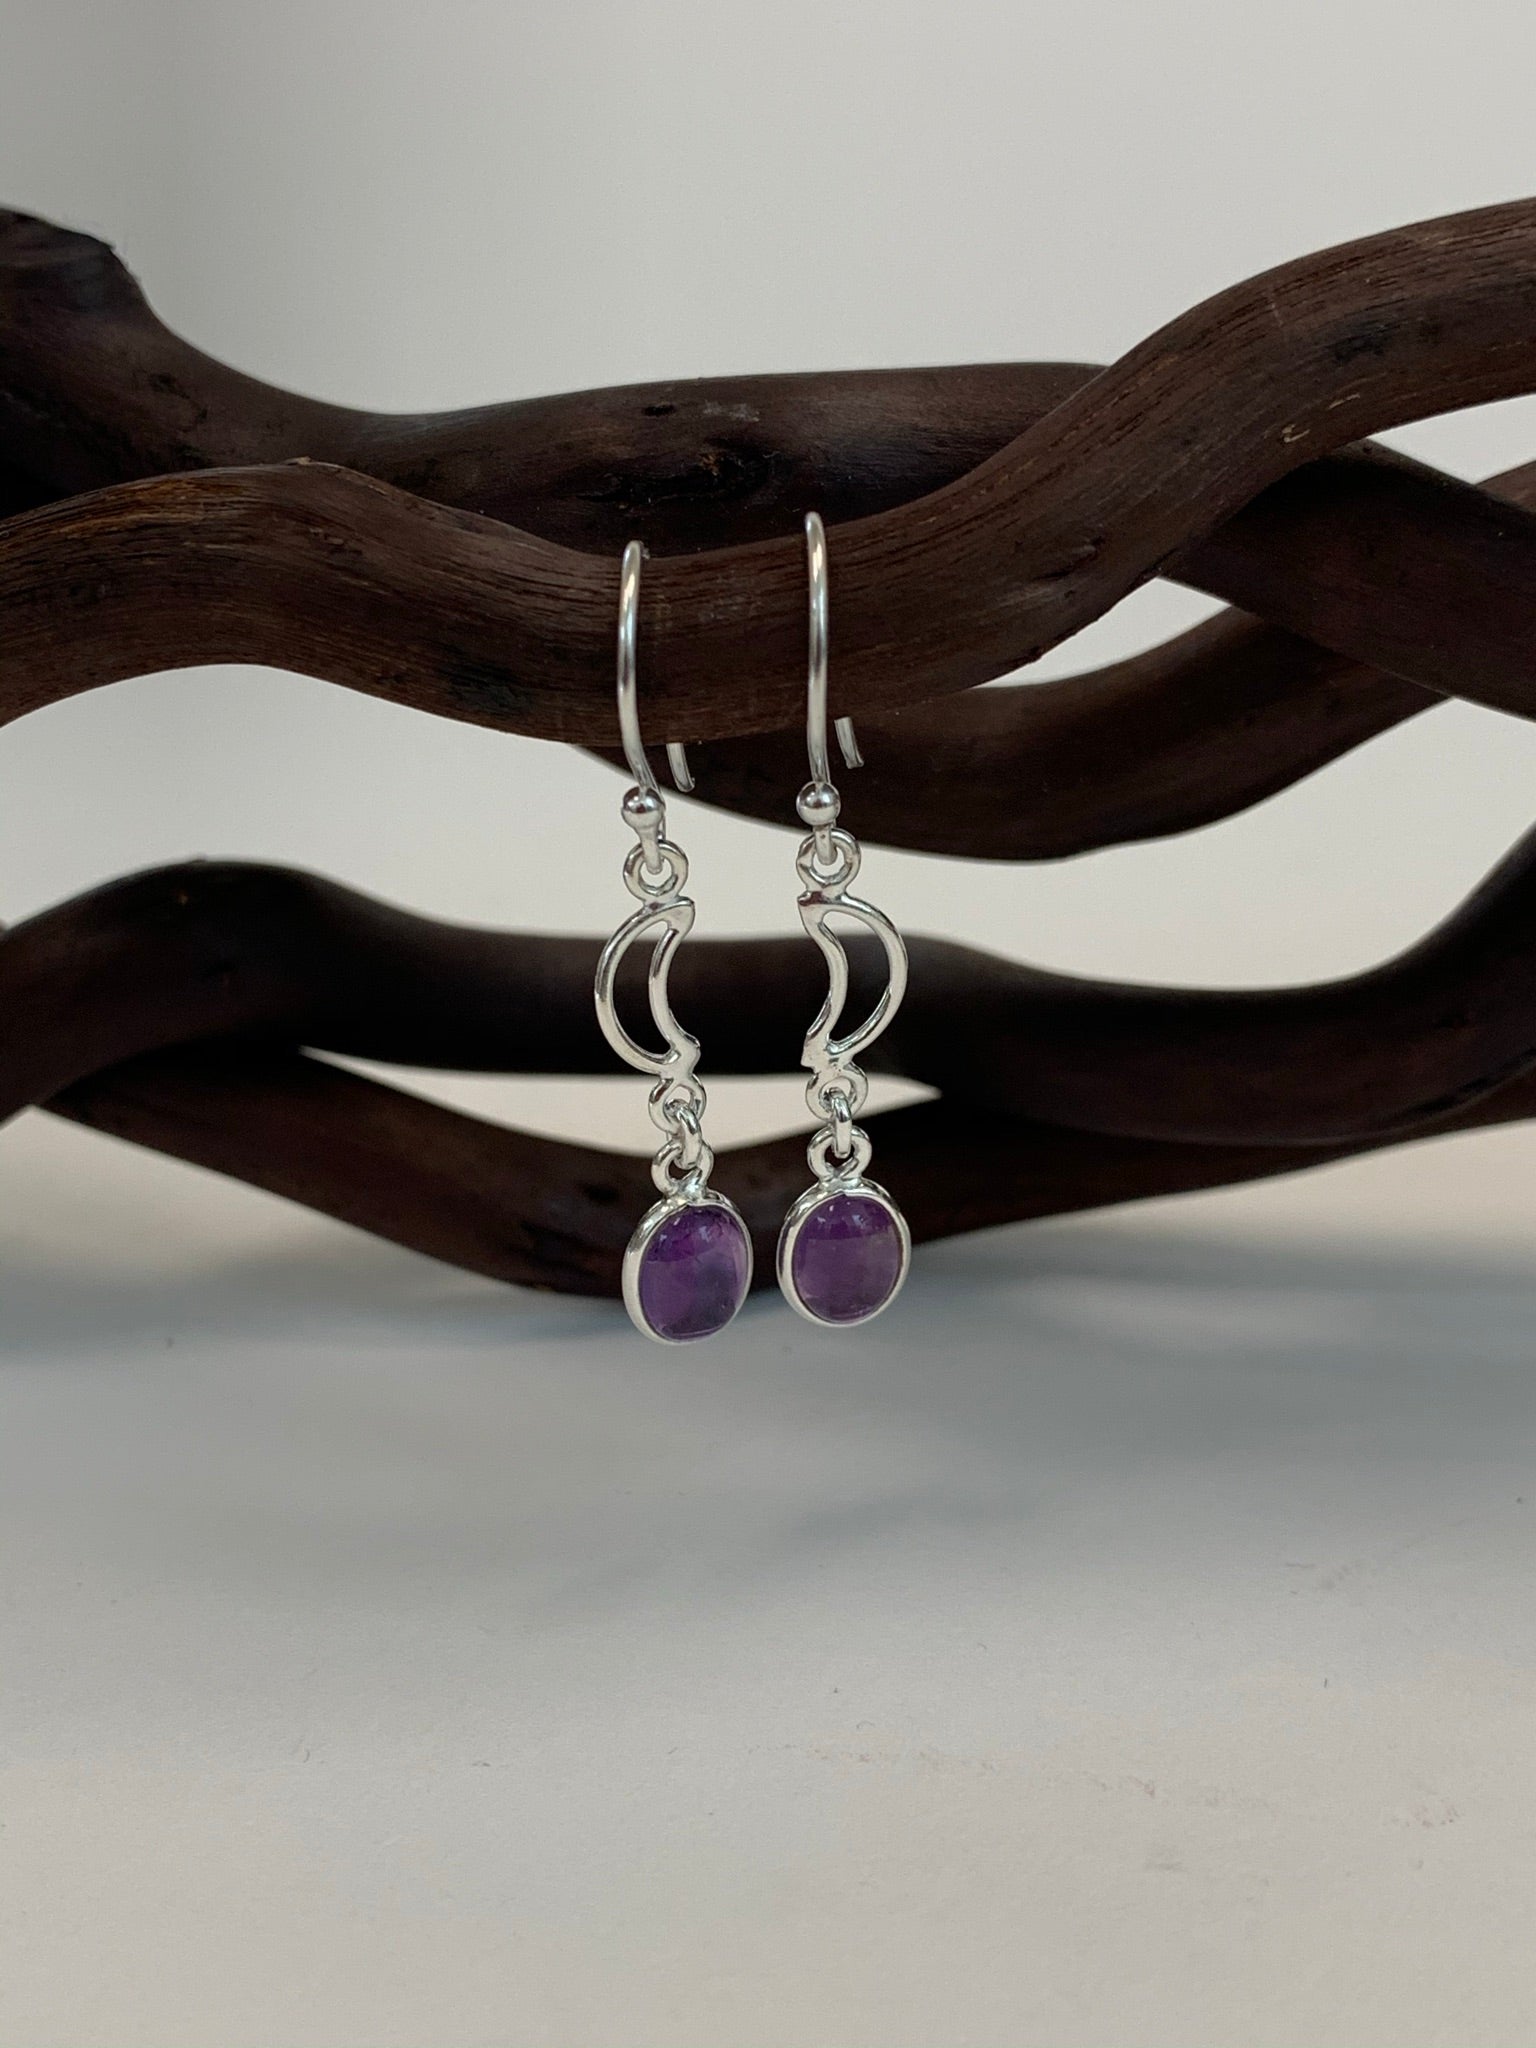 Little round amethyst gemstones (cabs, not faceted) dangle below two small open crescent moons. These earrings are lightweight, have wires, not posts and are approximately 1½" long.